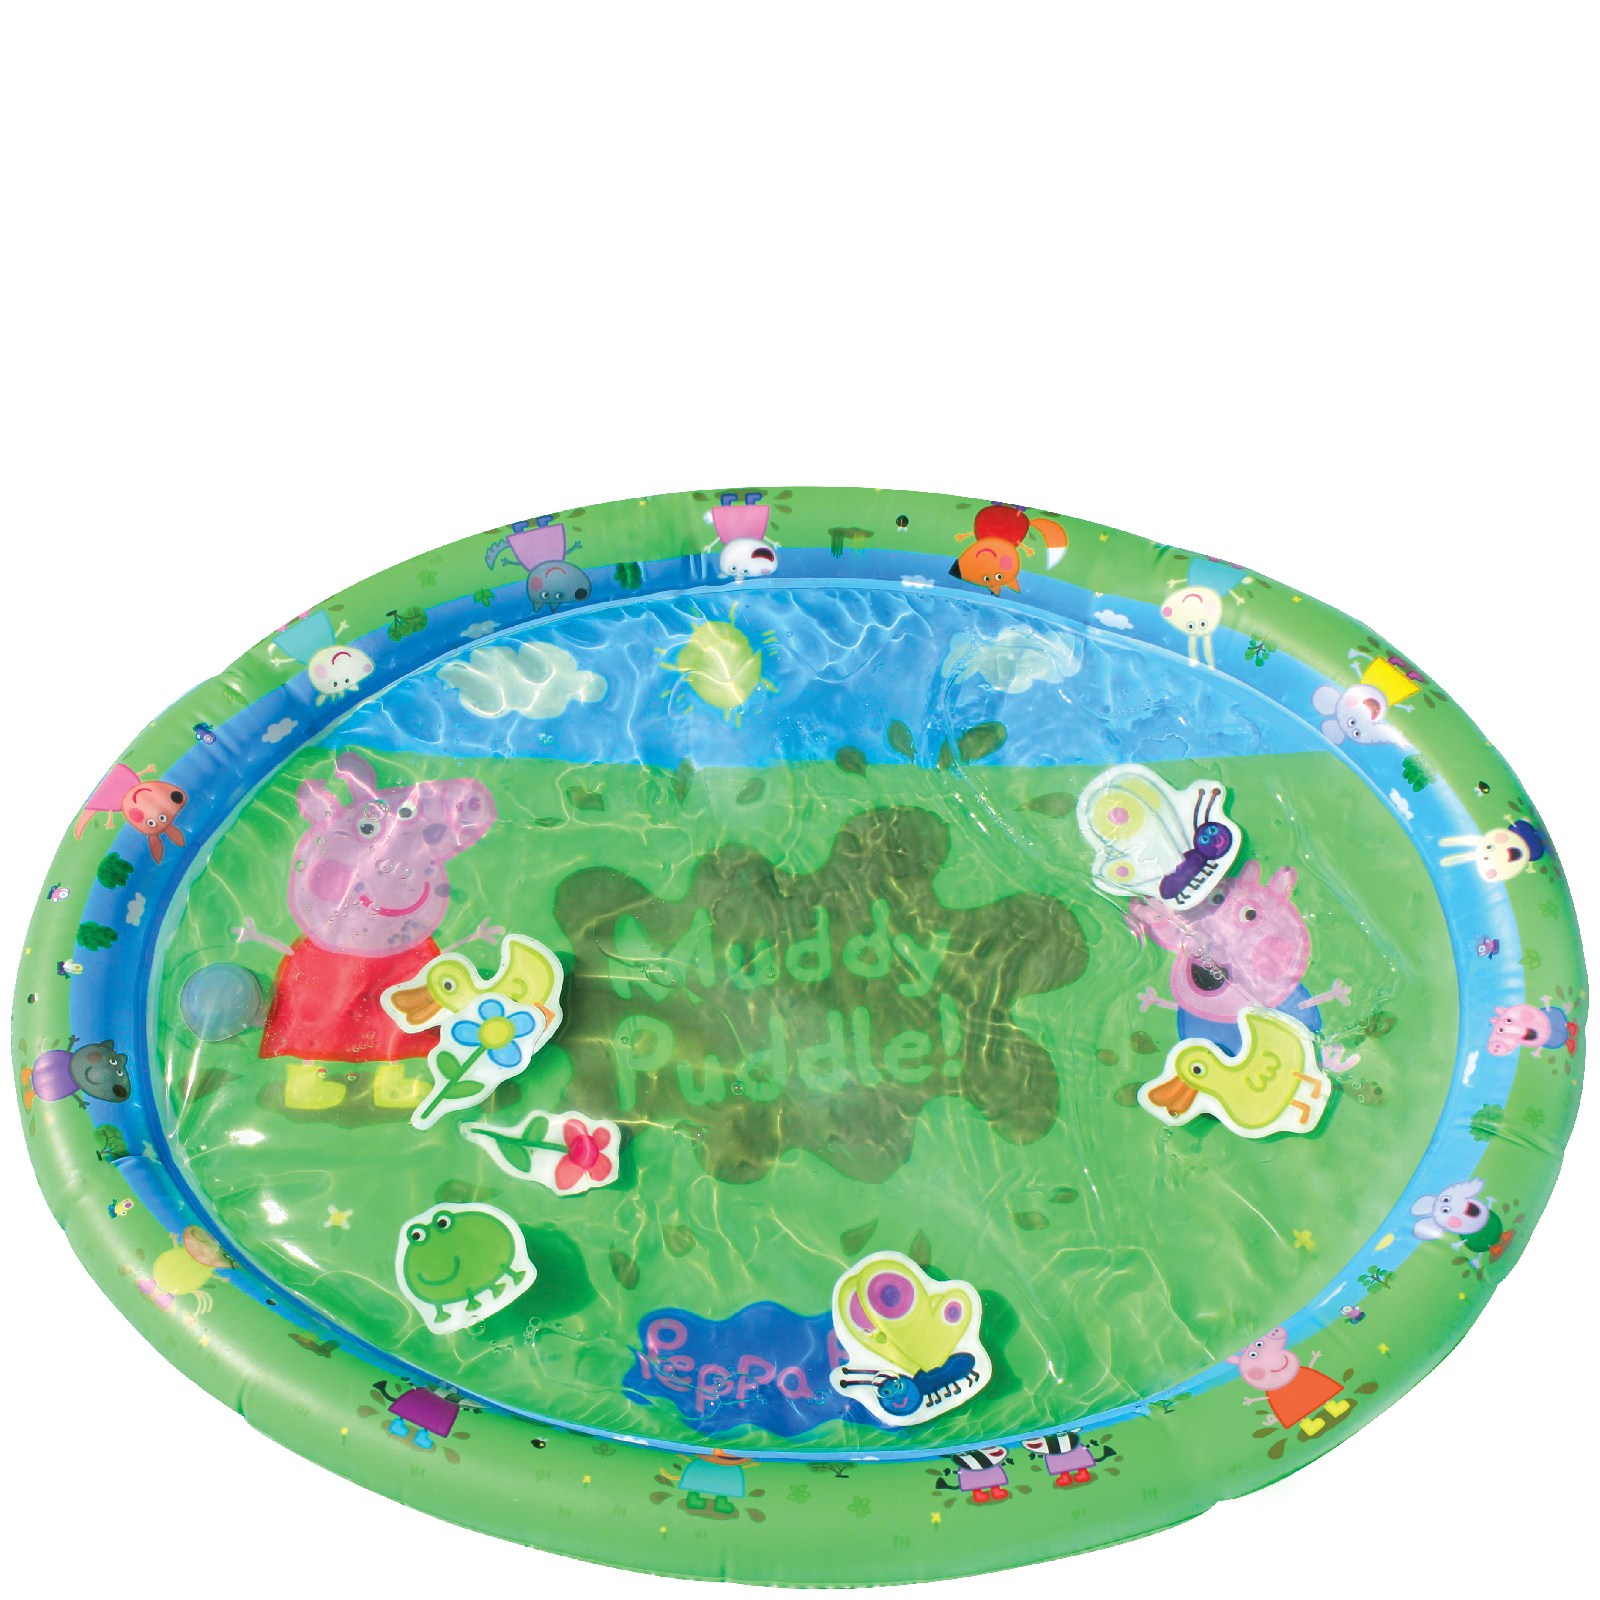 Peppa Pig Inflatable 'Muddy Puddle